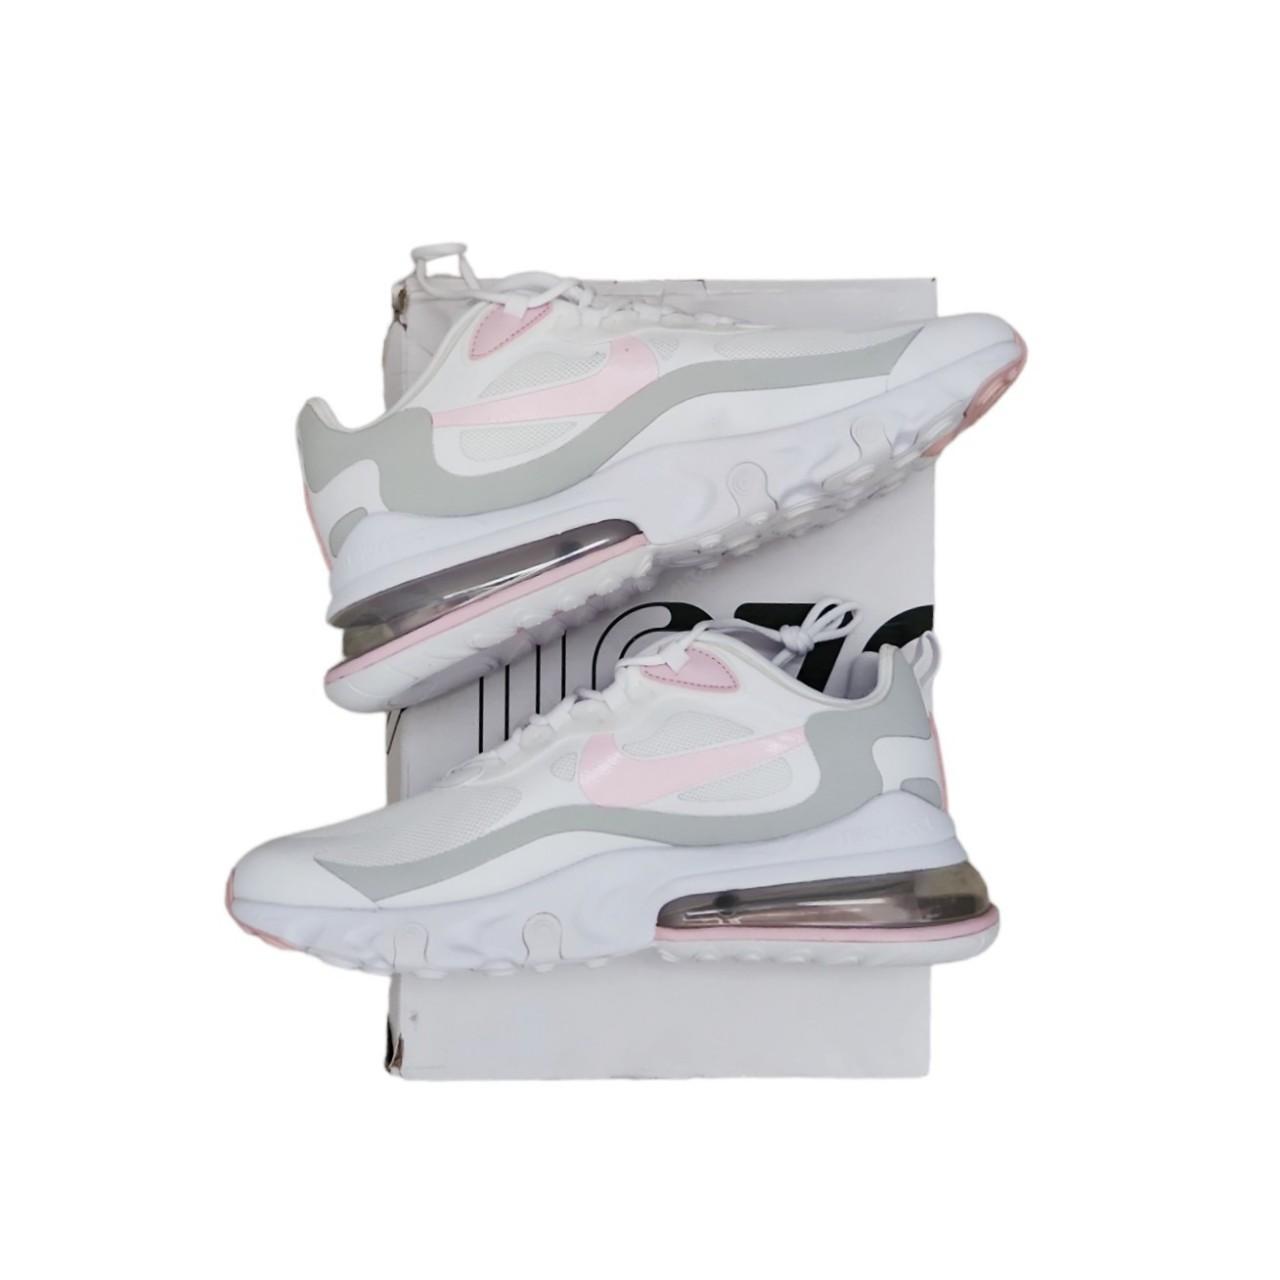 Nike Air Max 270 React pink and grey trainers